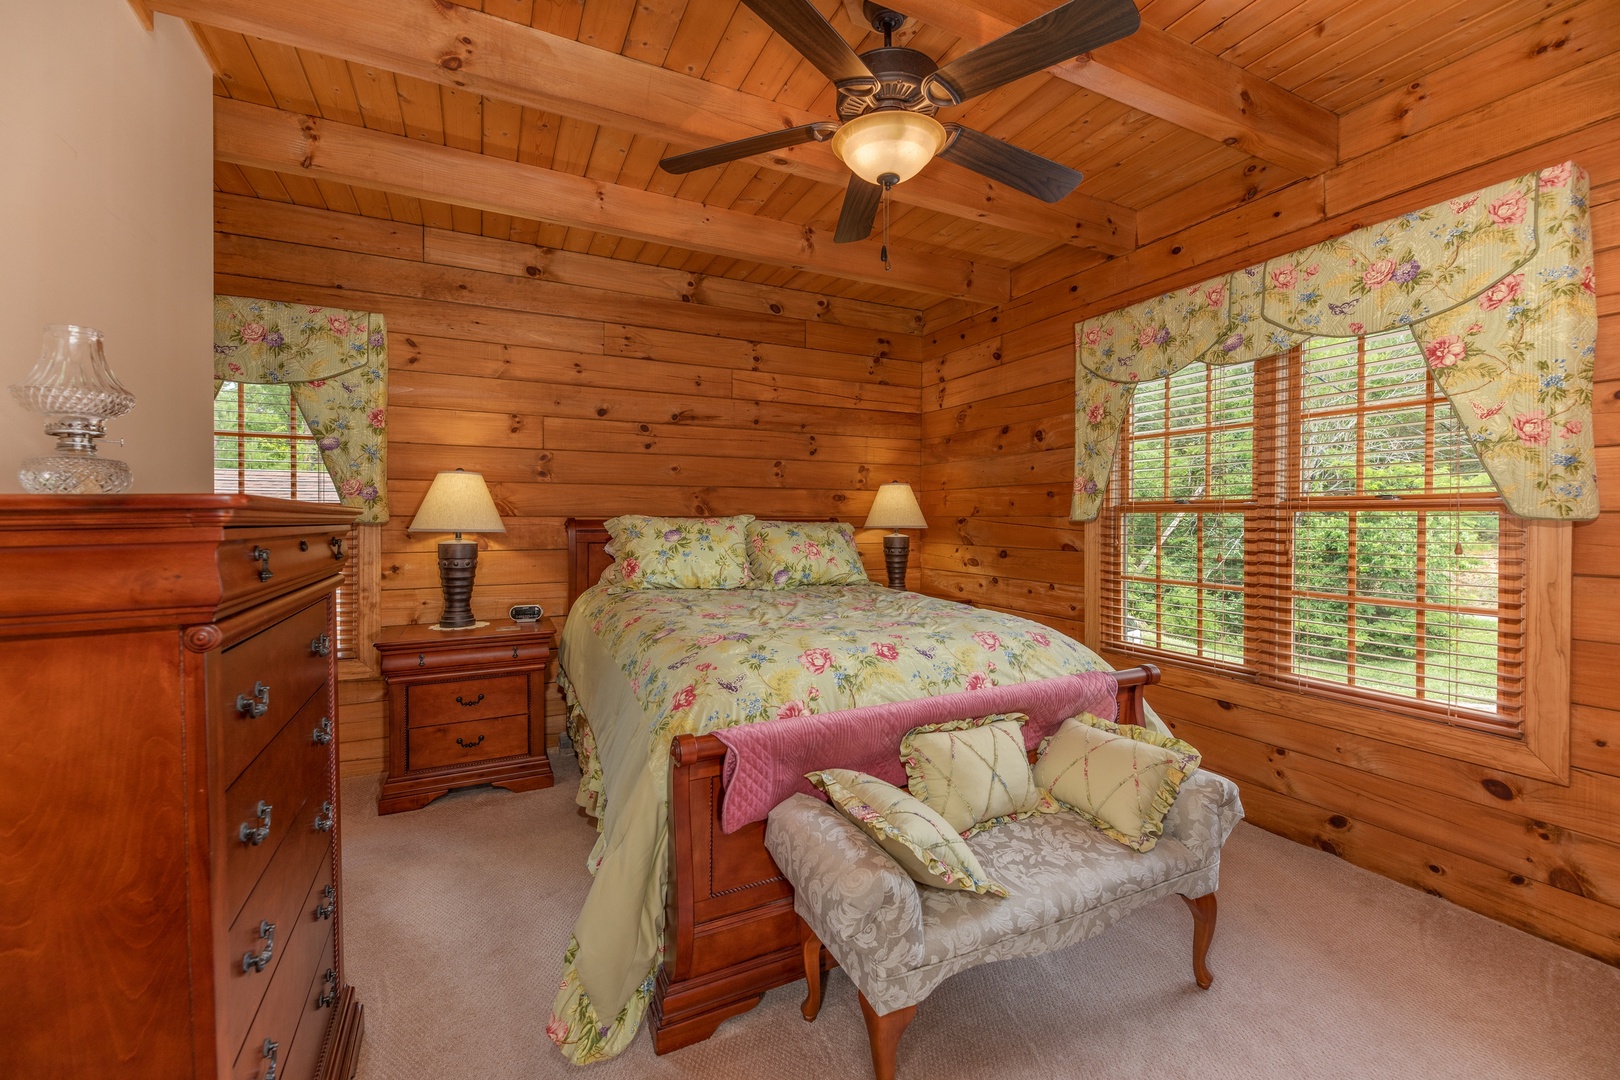 Bedroom with a bed, end tables, lamps, and a dresser at Mountain Lake Getaway, a 3 bedroom cabin rental located at Douglas Lake